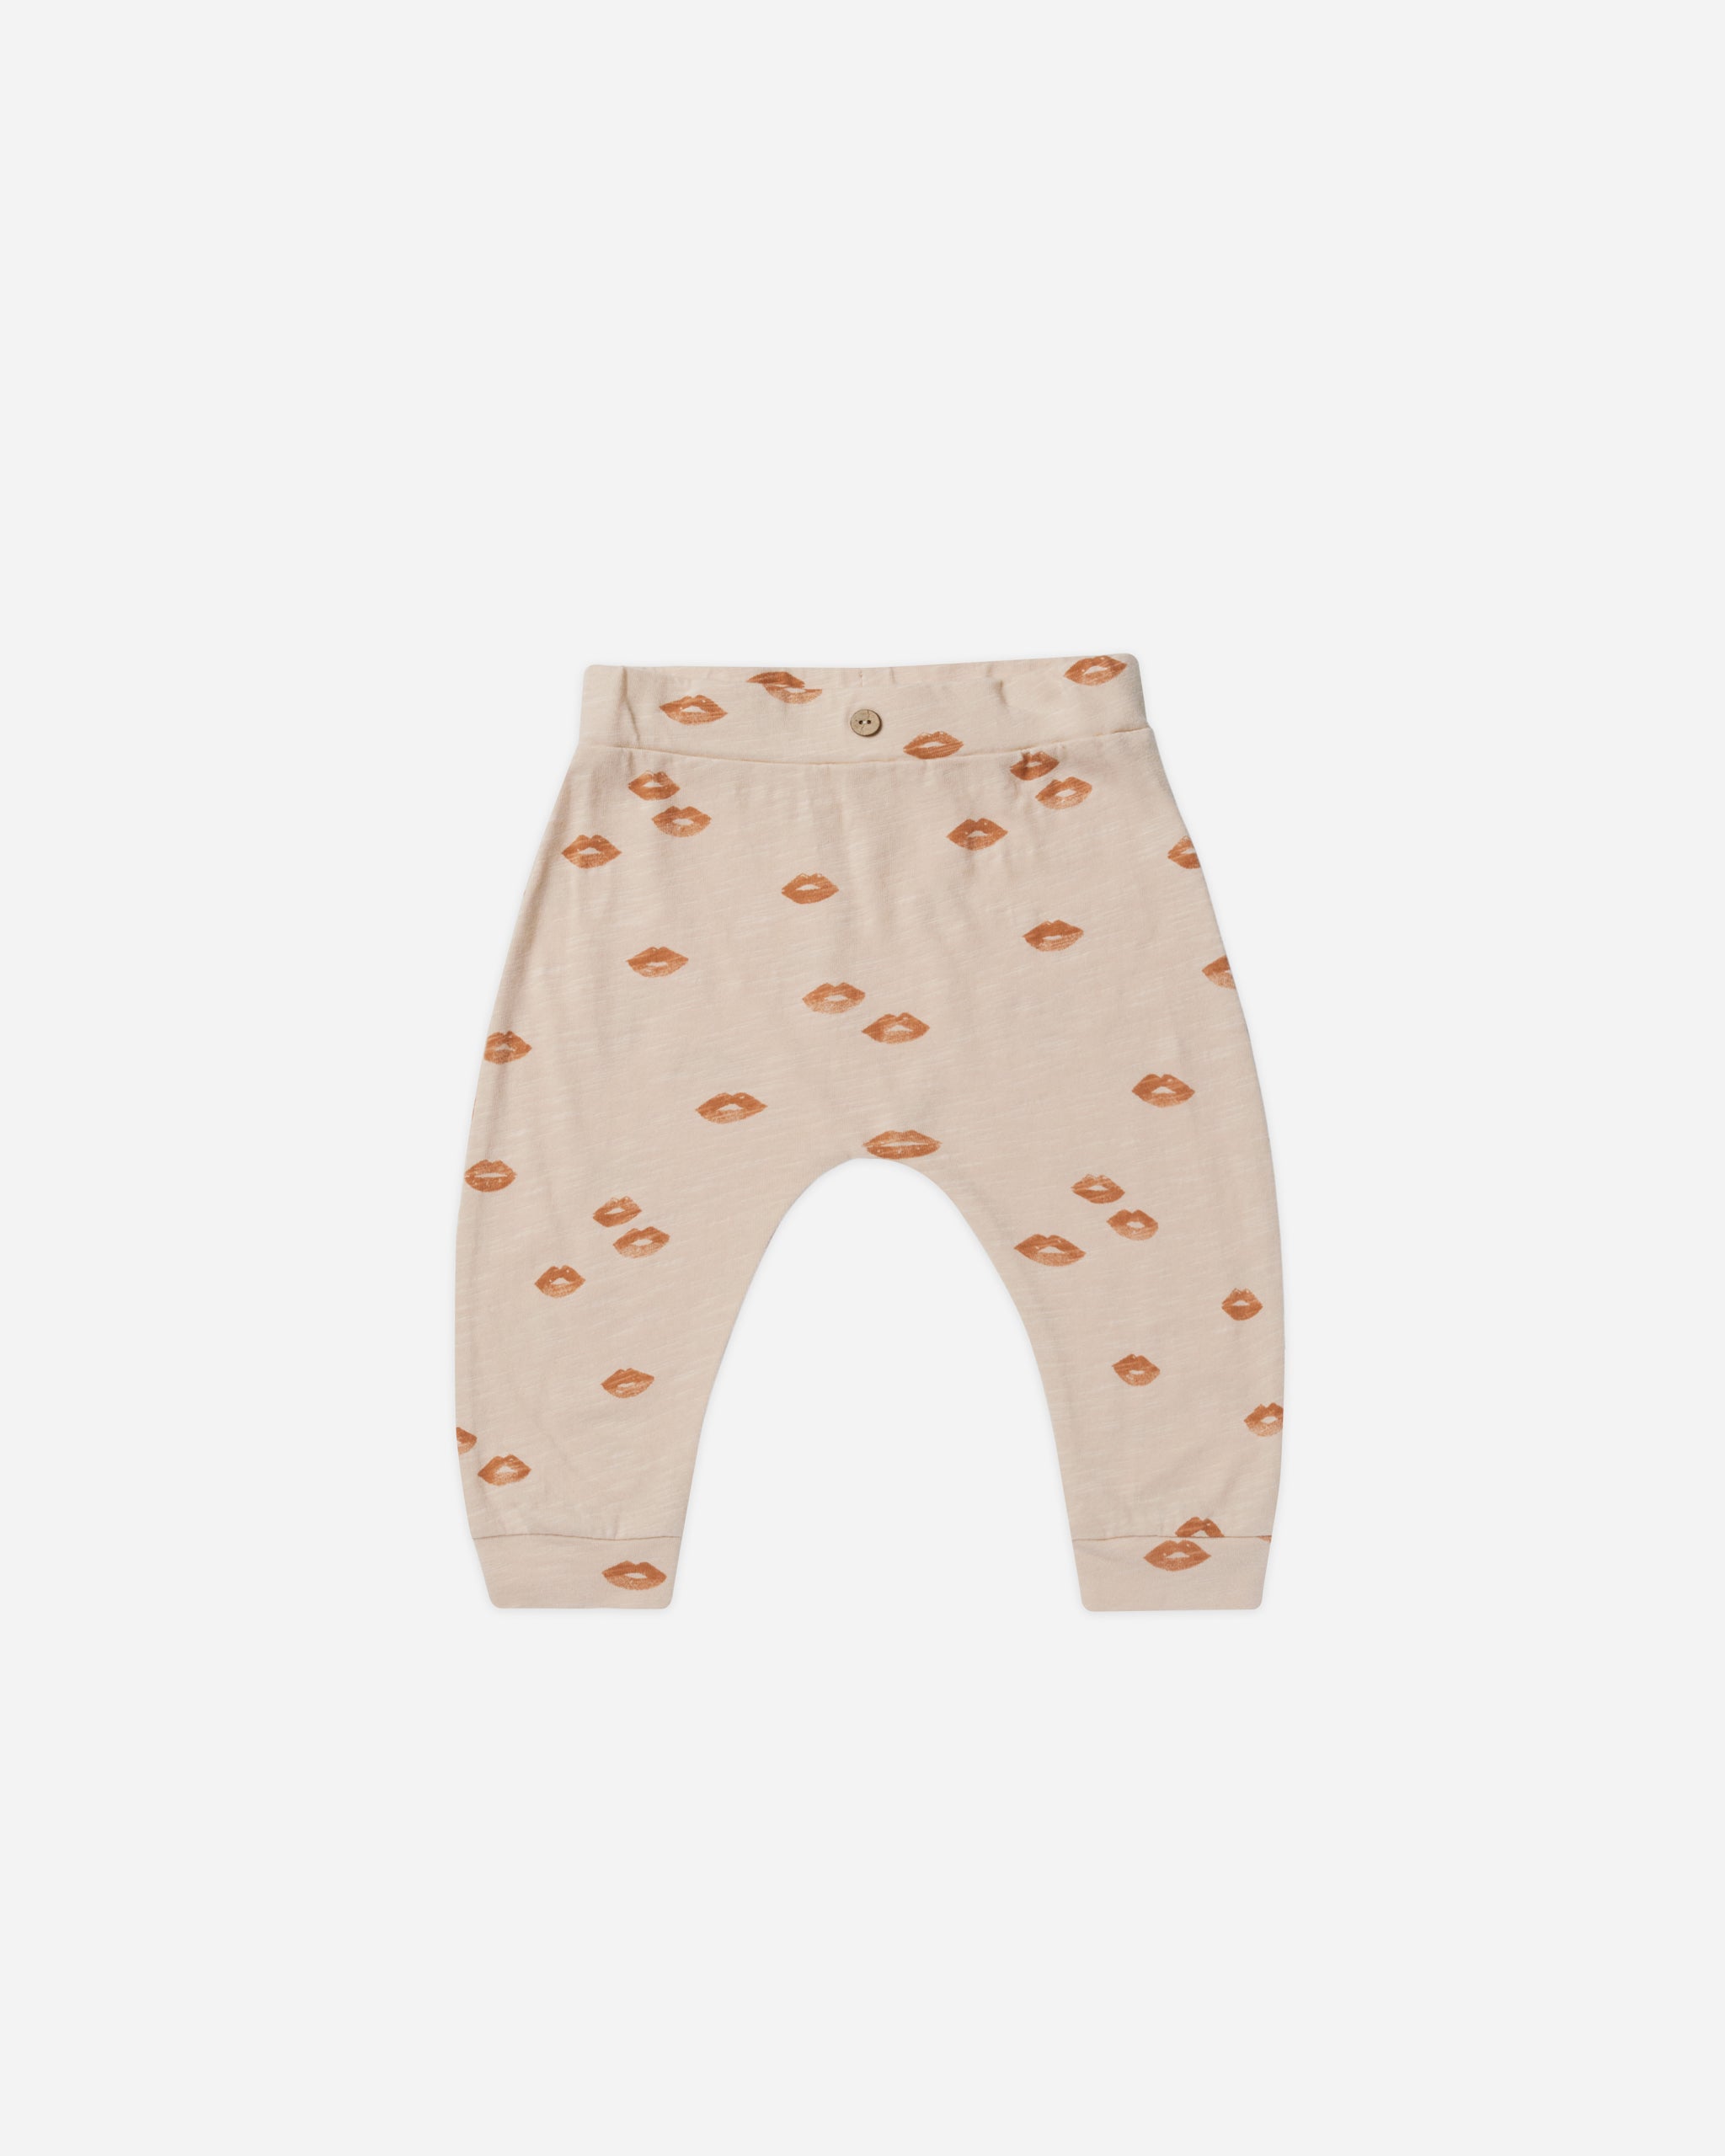 Slouch Pant || Lips - Rylee + Cru | Kids Clothes | Trendy Baby Clothes | Modern Infant Outfits |